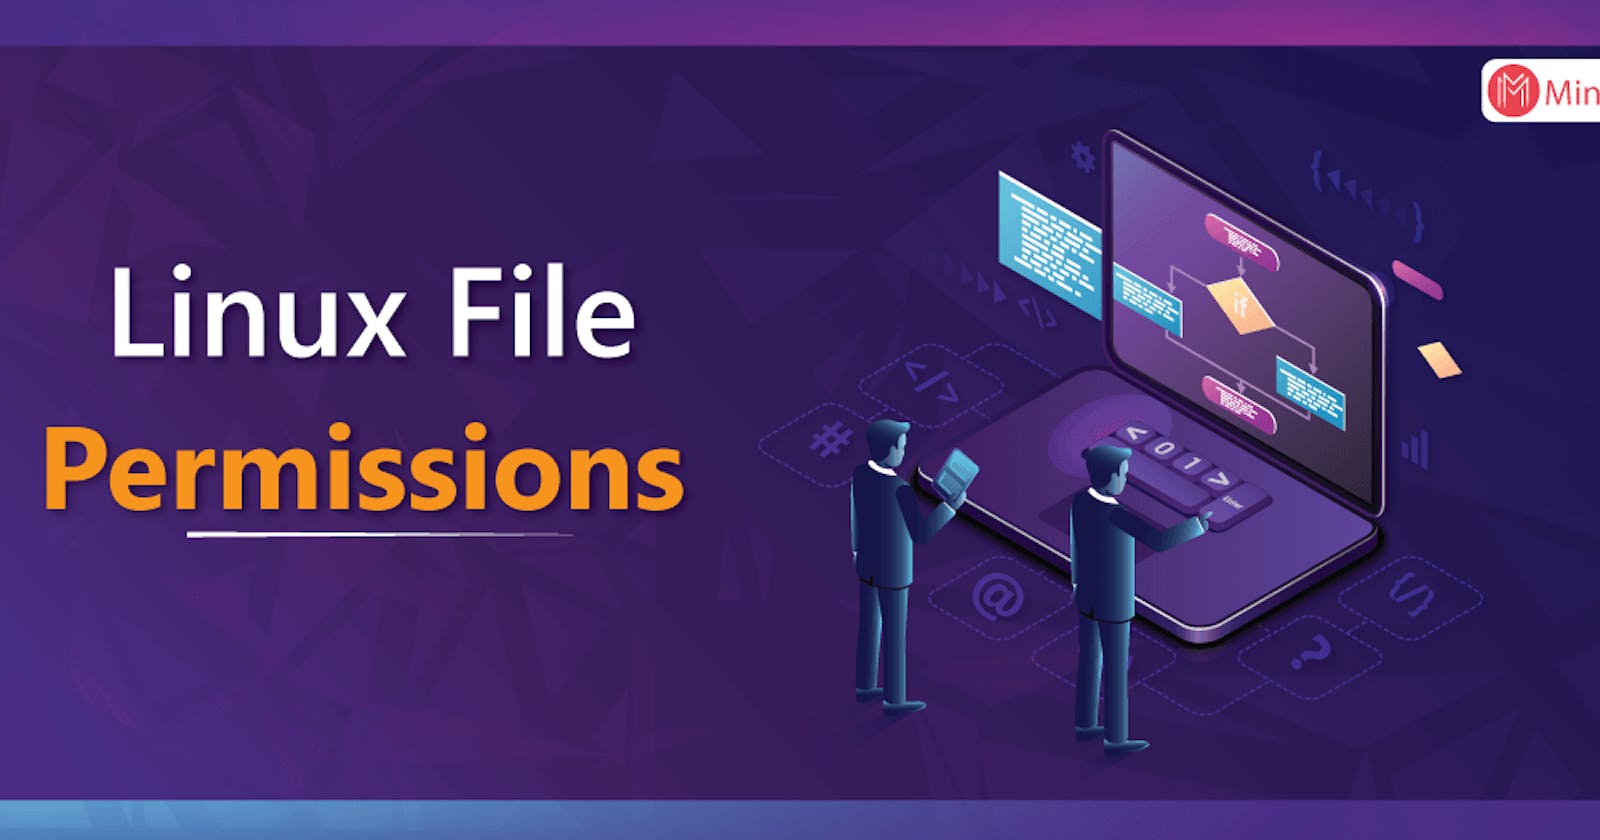 Day 6: File Permissions and Access Control Lists